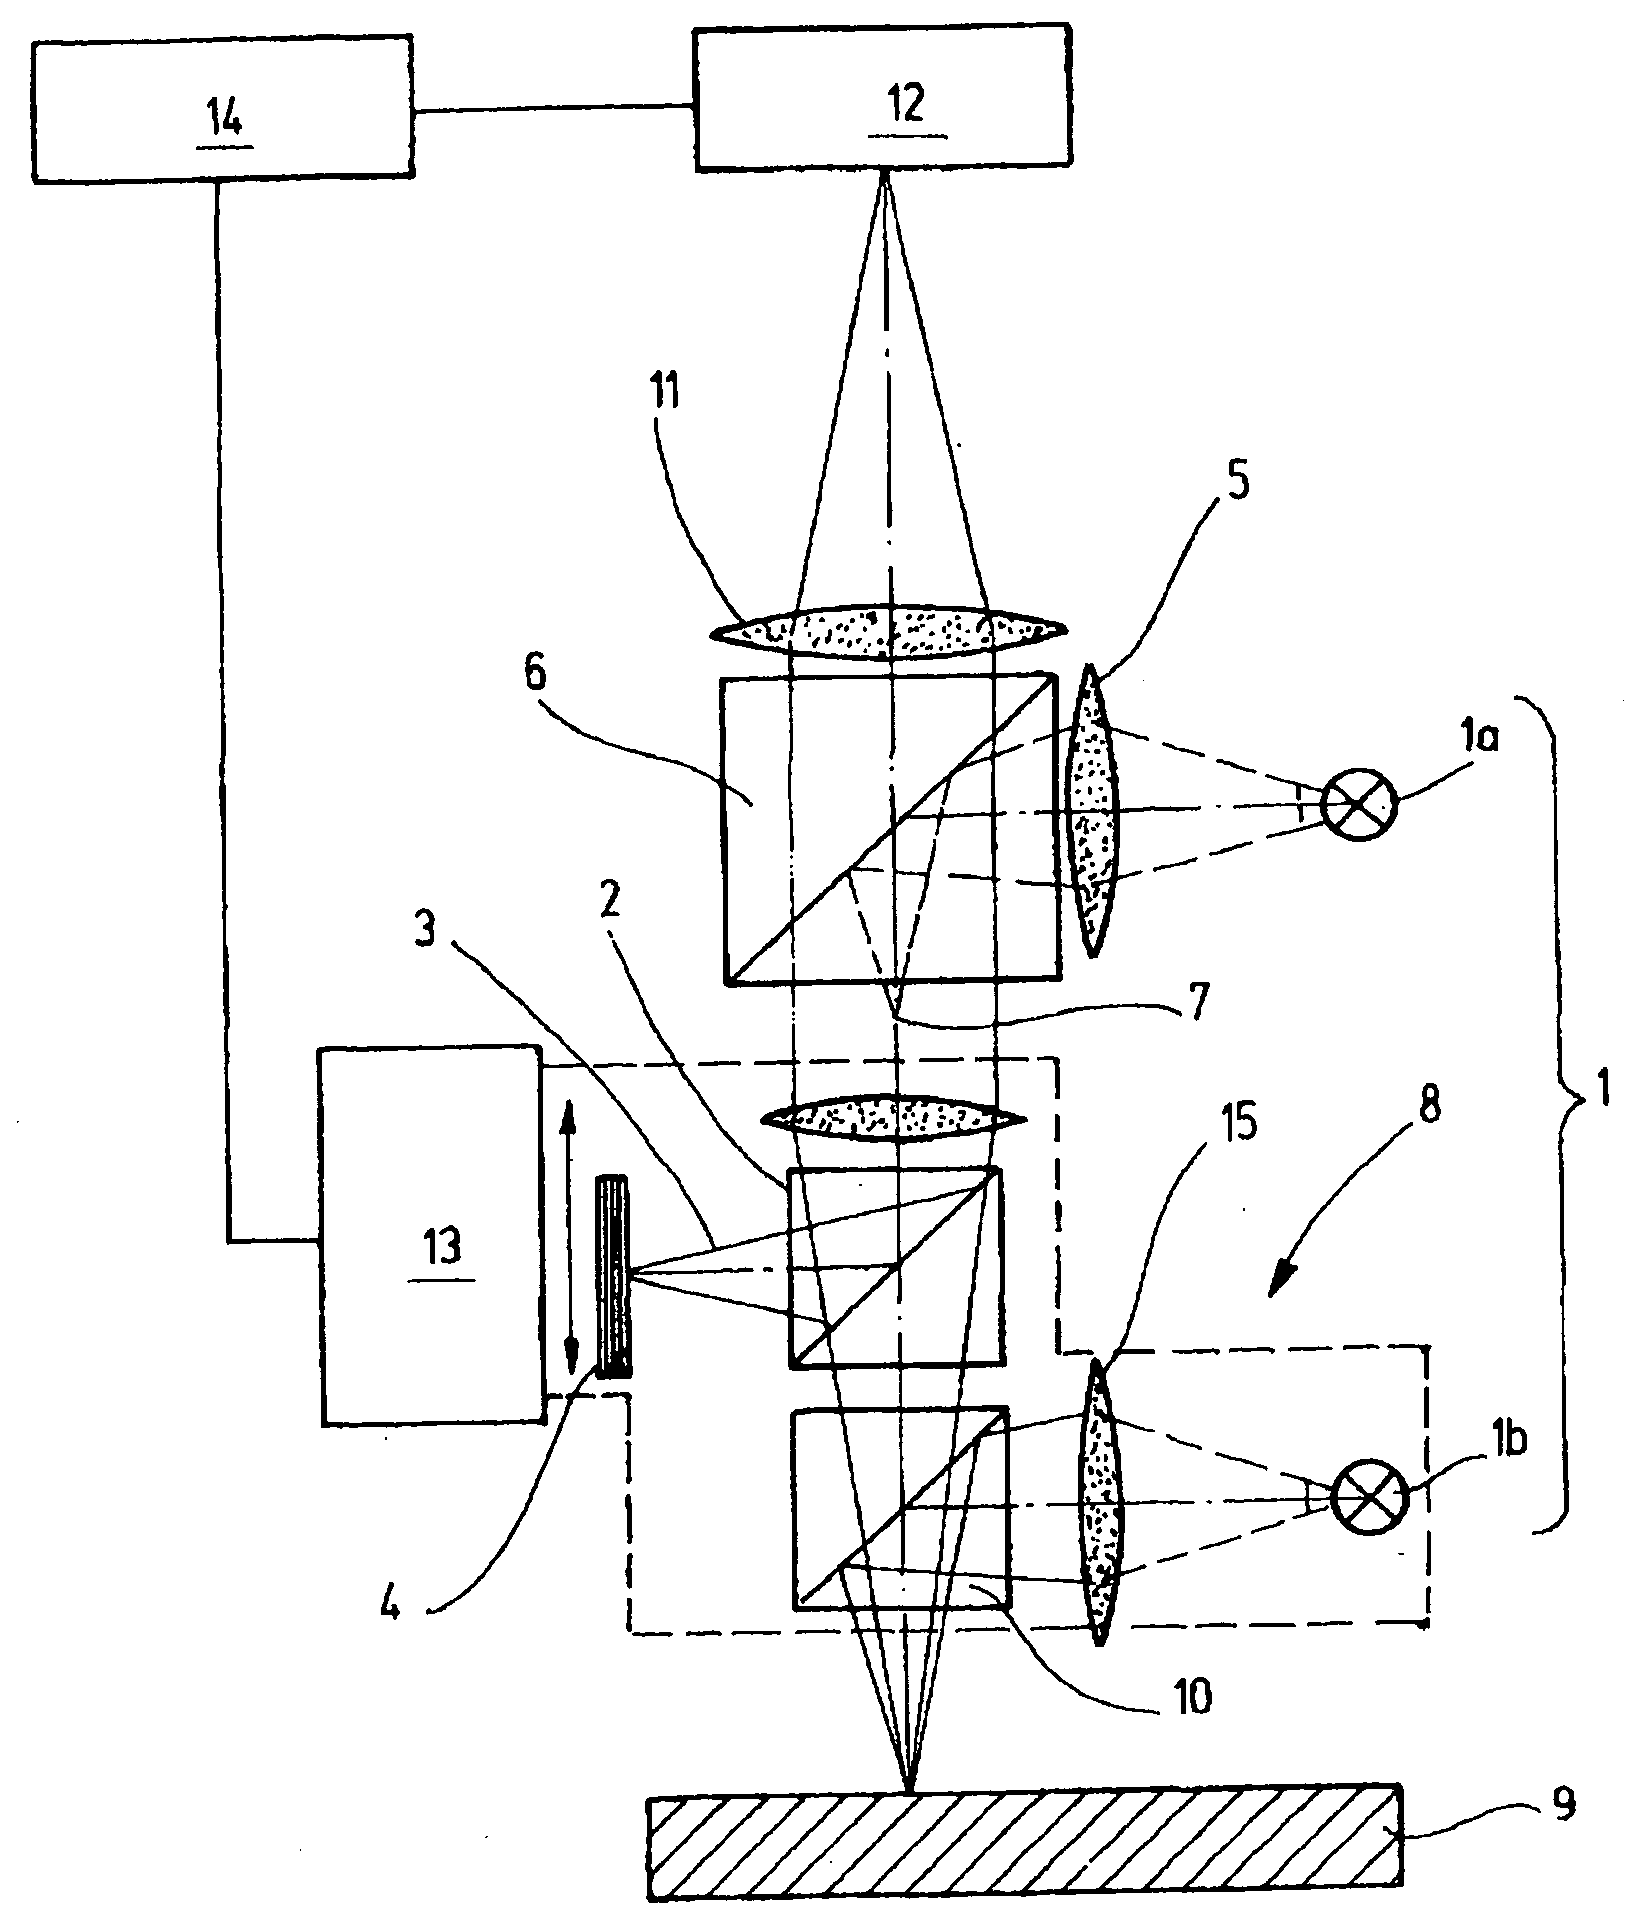 Apparatus and method for a combined interferometric and image based geometric determination, particularly in the microsystem technology